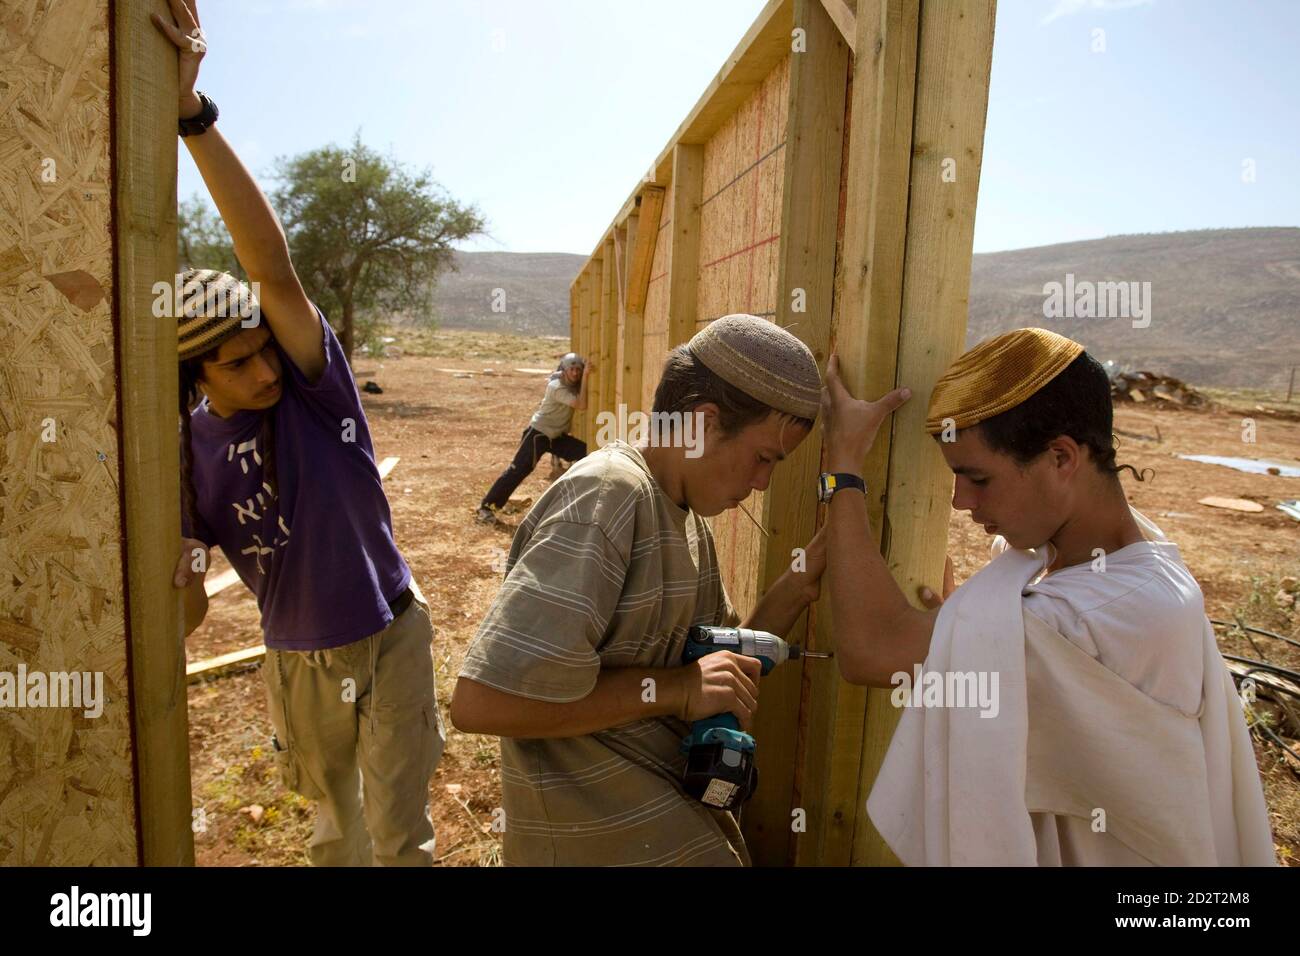 Jewish settlers build a makeshift synagogue in the unauthorised outpost of Maoz Esther, near the Jewish settlement of Kokhav Hashahar, northeast of the West Bank city of Ramallah June 4, 2009, after Israeli authorities demolished similar structures at the outpost on Wednesday.    REUTERS/Baz Ratner (WEST BANK POLITICS) Stock Photo